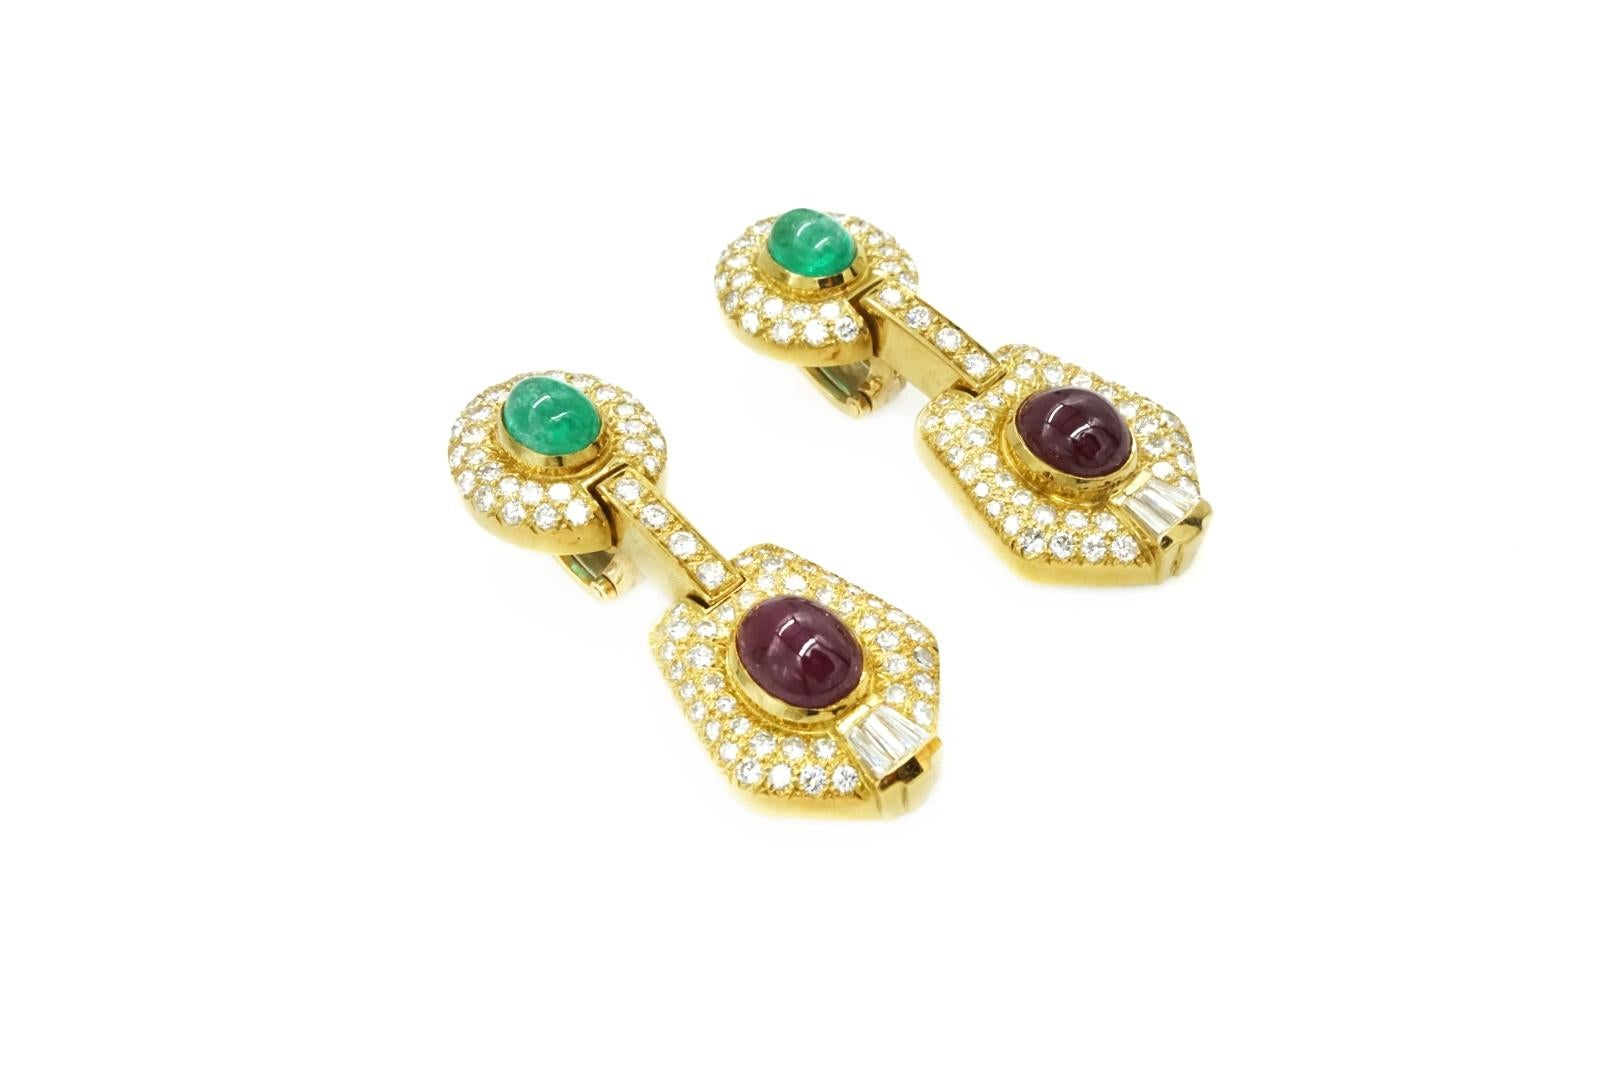 Diamond, Ruby, and Emerald Earrings in 18k. Made in USA, circa 1970.
Along with two Cabochon Rubies weighing app 5.00 ct and two Cabochon Emeralds weighing app 5.00 cts, set with 164 and app. 5.00 ct of Diamonds

G-H Color VS1-SI1 Clarity
Gold